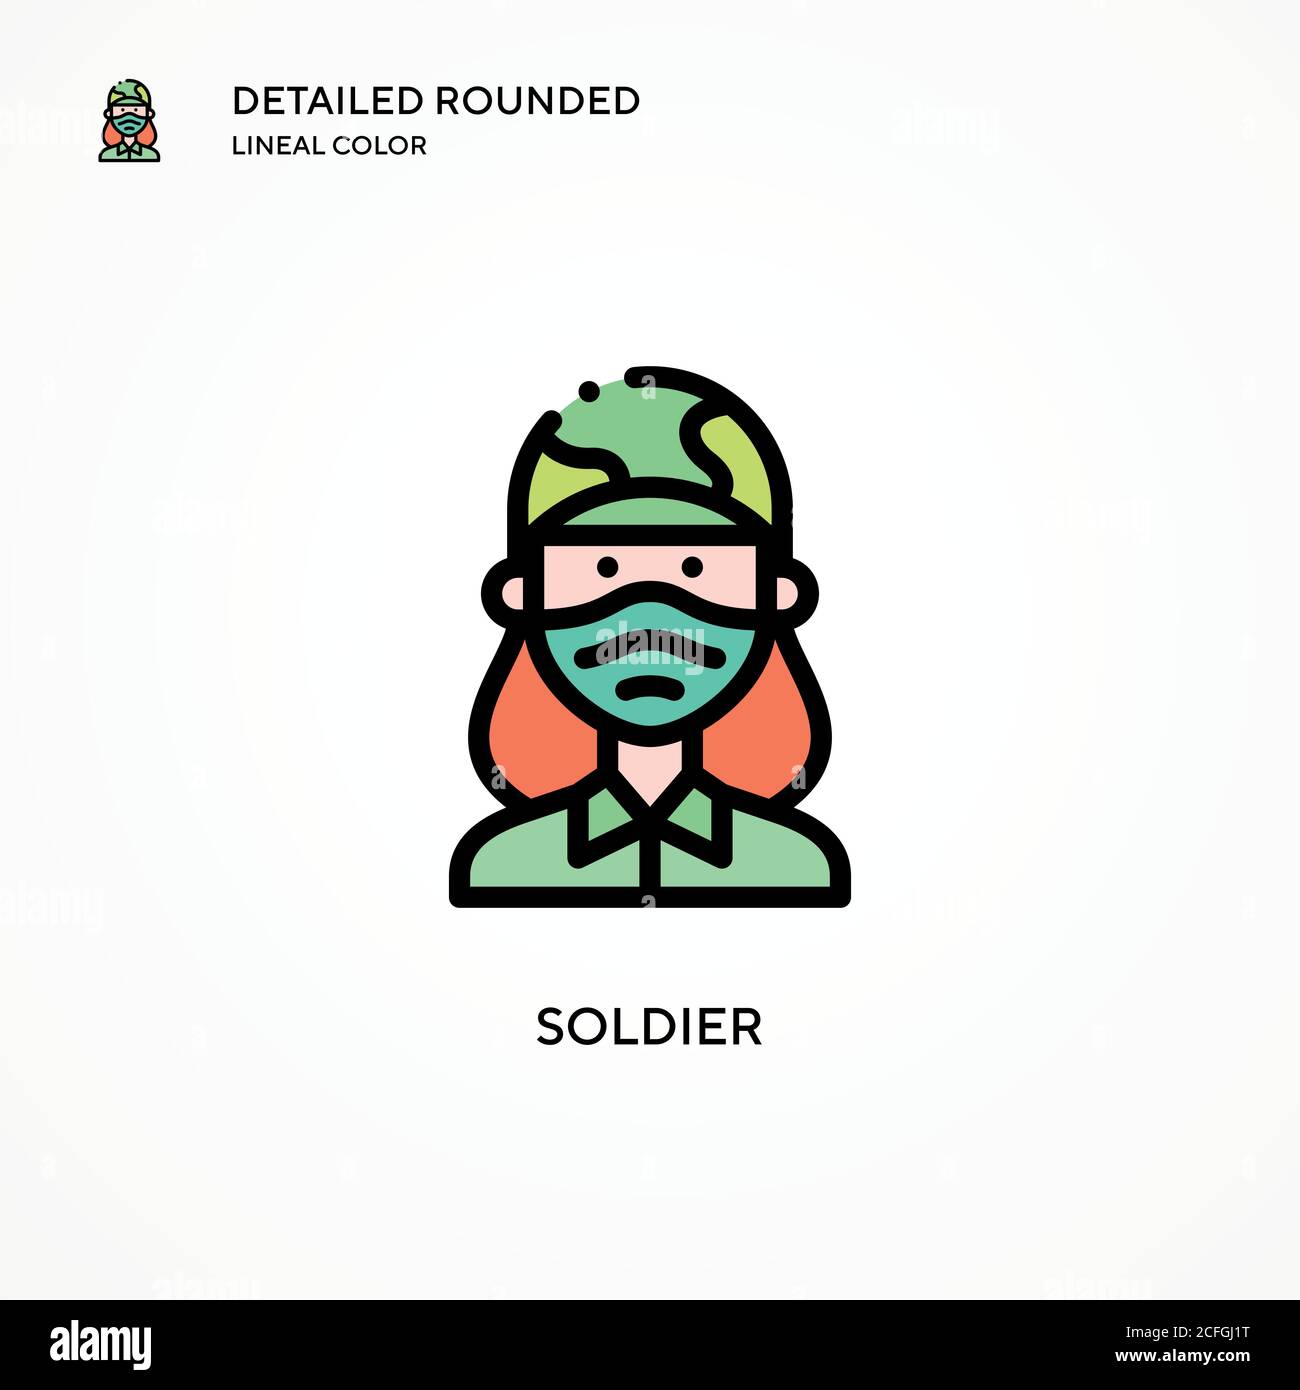 Soldier vector icon. Modern vector illustration concepts. Easy to edit and customize. Stock Vector